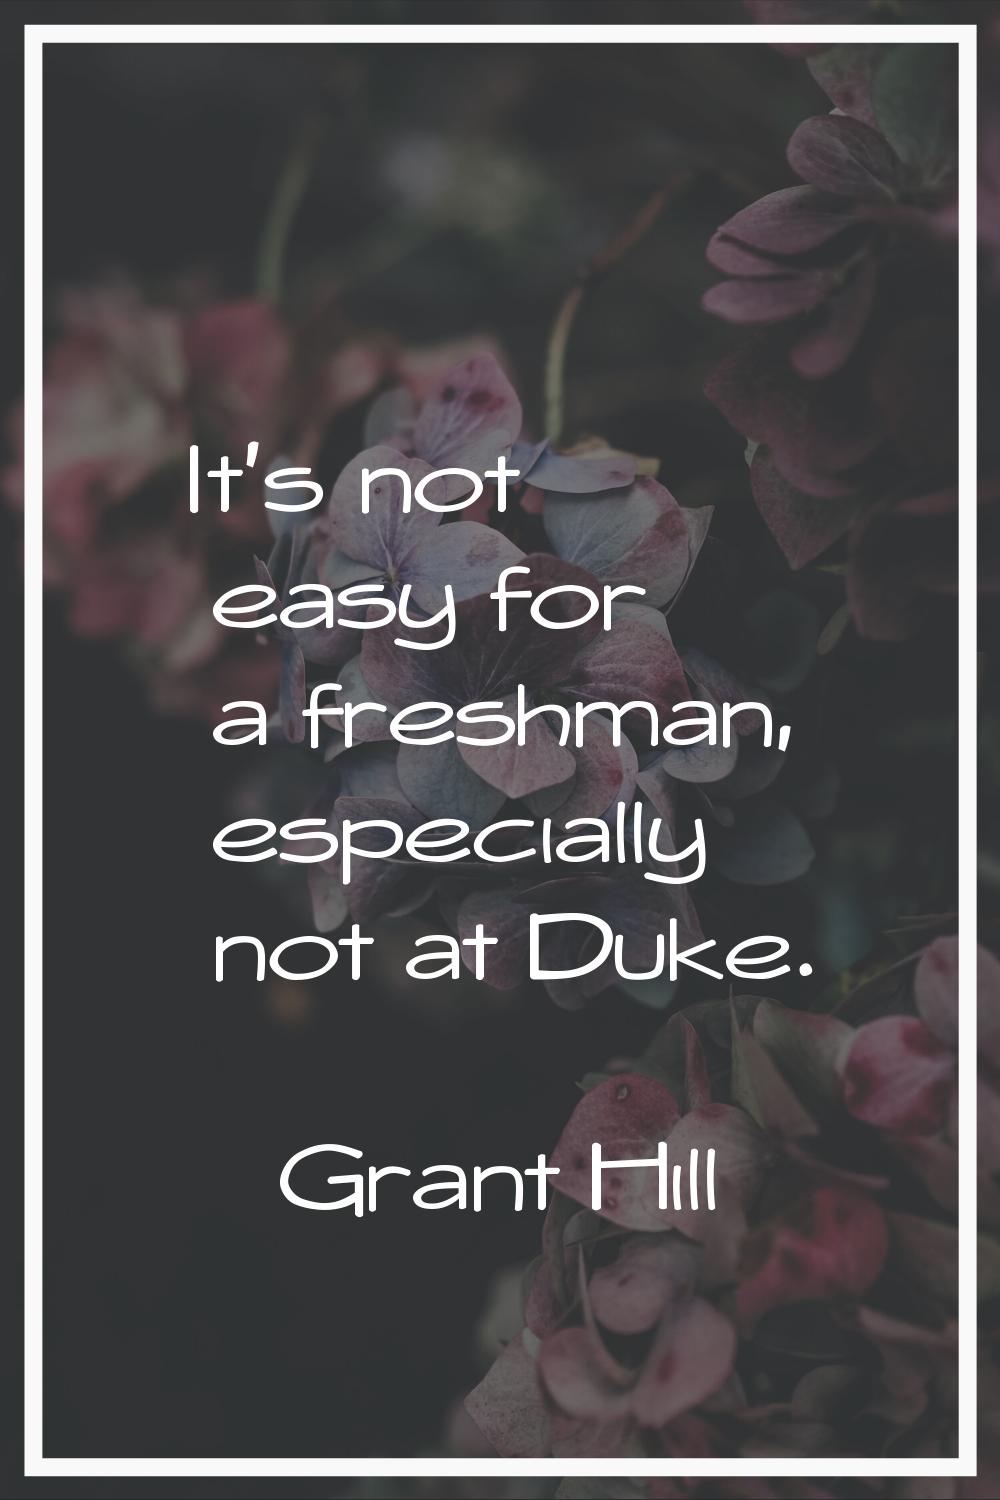 It's not easy for a freshman, especially not at Duke.